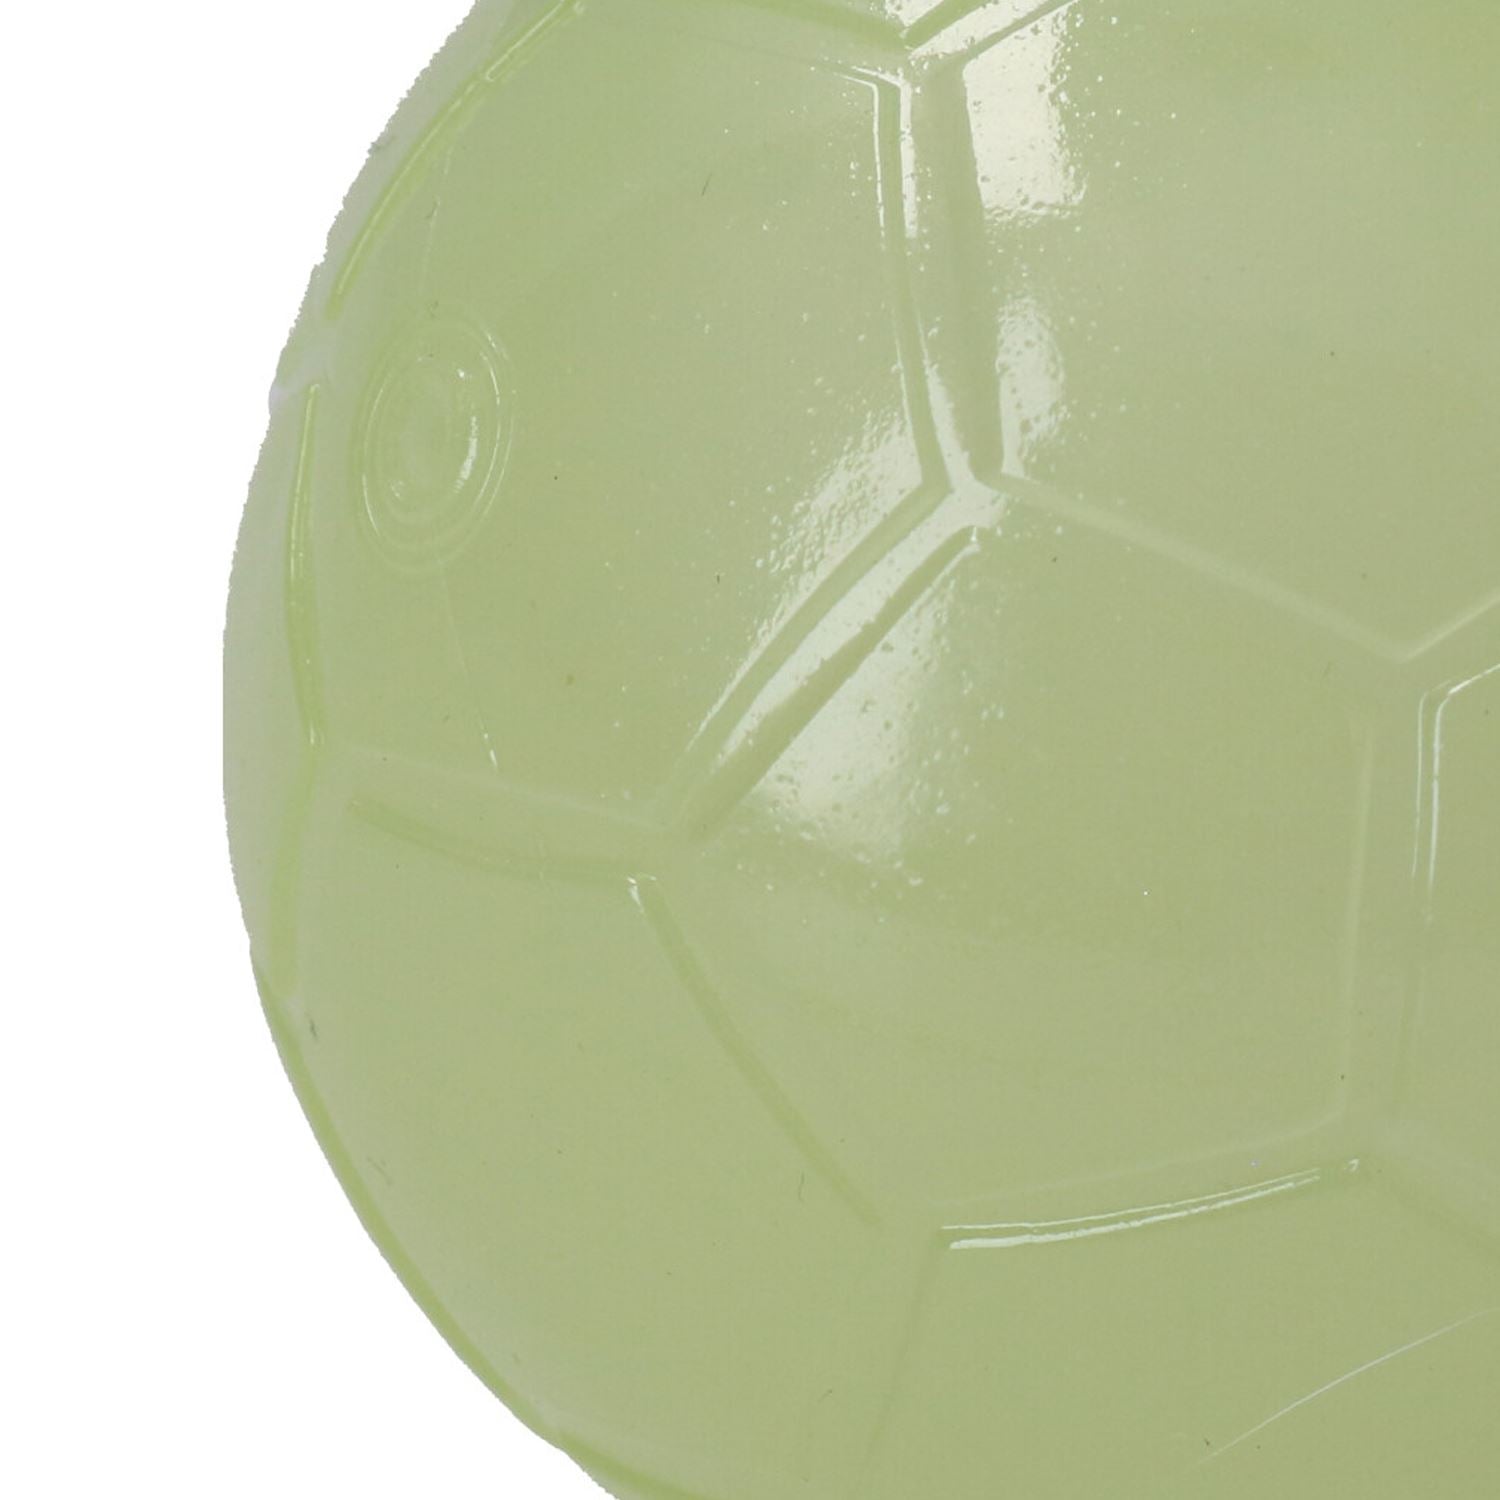 Dog Glow In The Dark Squeaky Bouncy Football For Fetch/ Ball Launchers 6cm